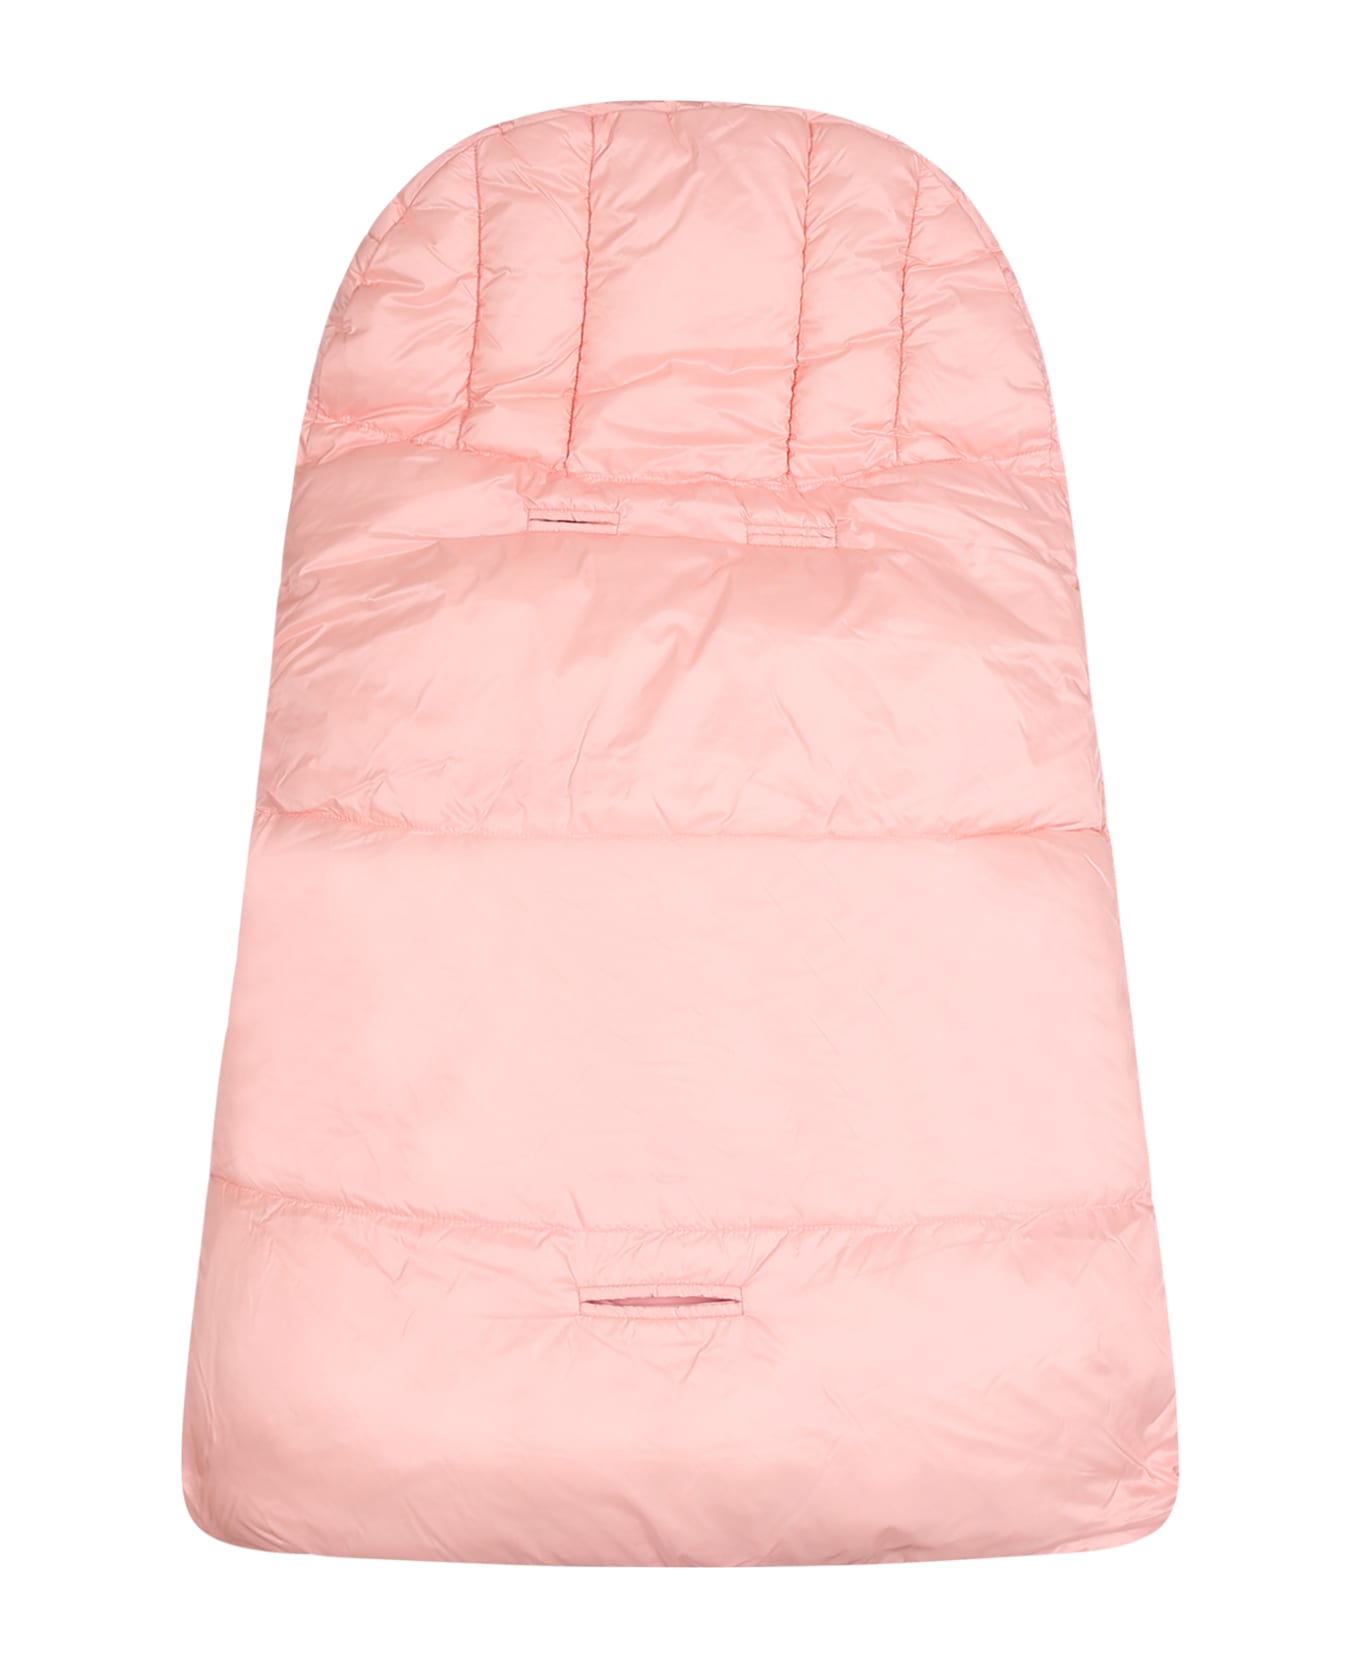 Moschino Pink Sleeping Bag For Baby Girl With Teddy Bear And Logo - Pink アクセサリー＆ギフト